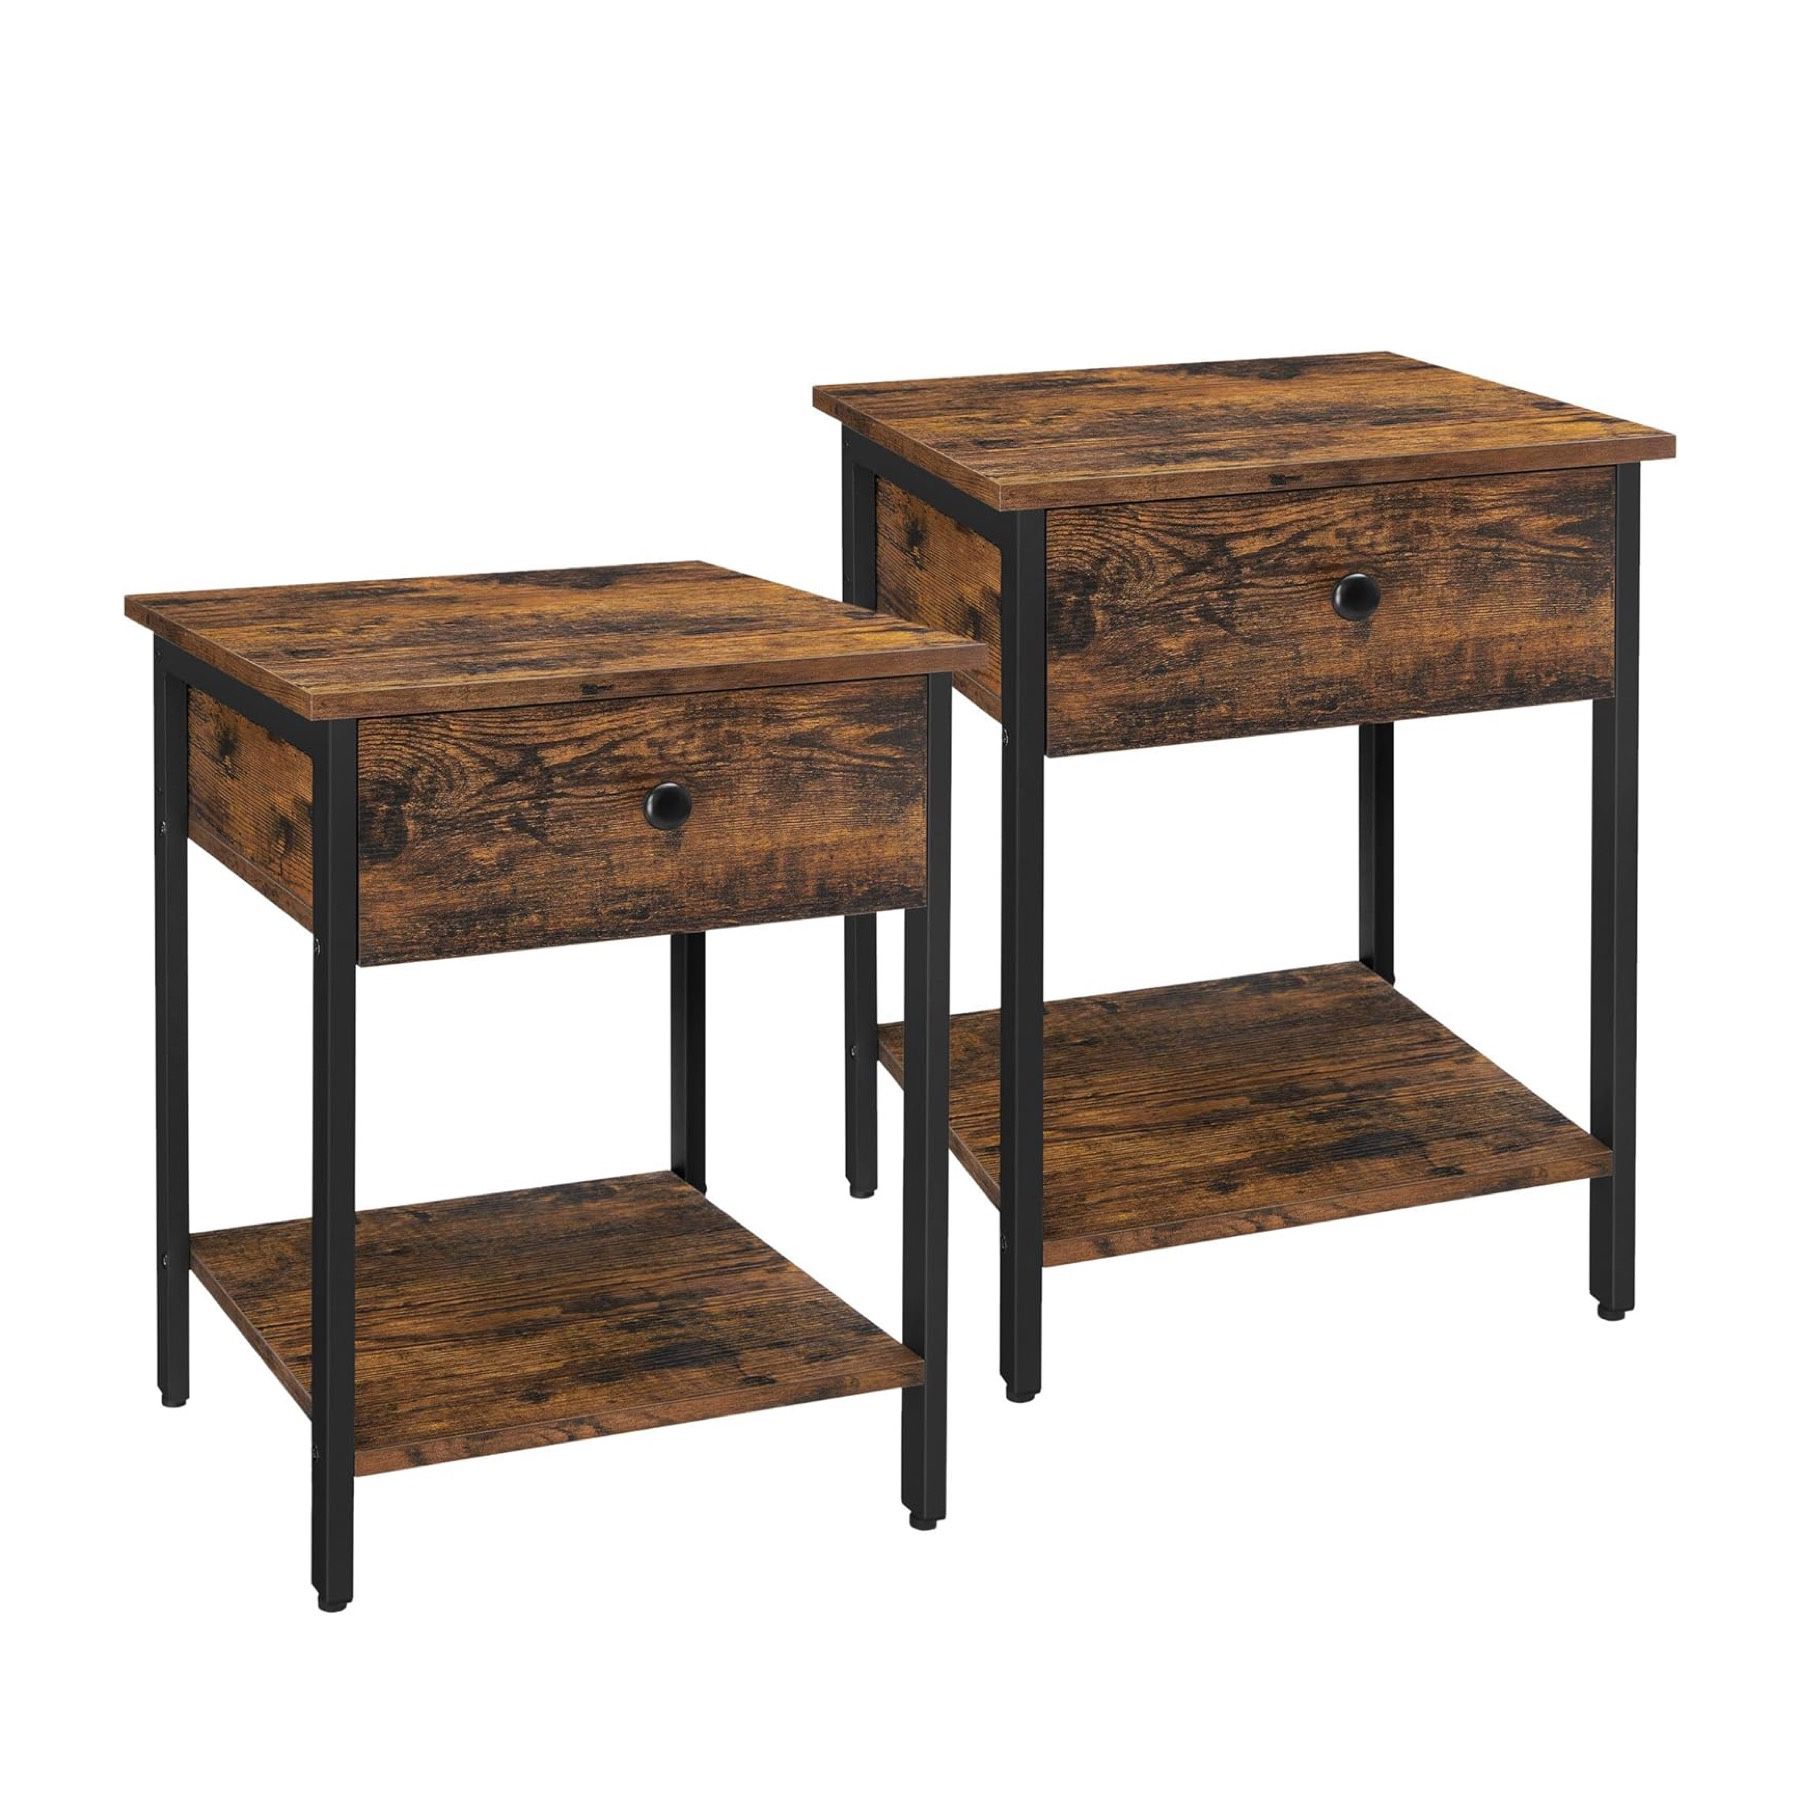 Nightstands (Set of 2pcs), Side Table with Drawer, End Table, Bedside Tables, for Bedroom, Industrial Style (Rustic Brown)